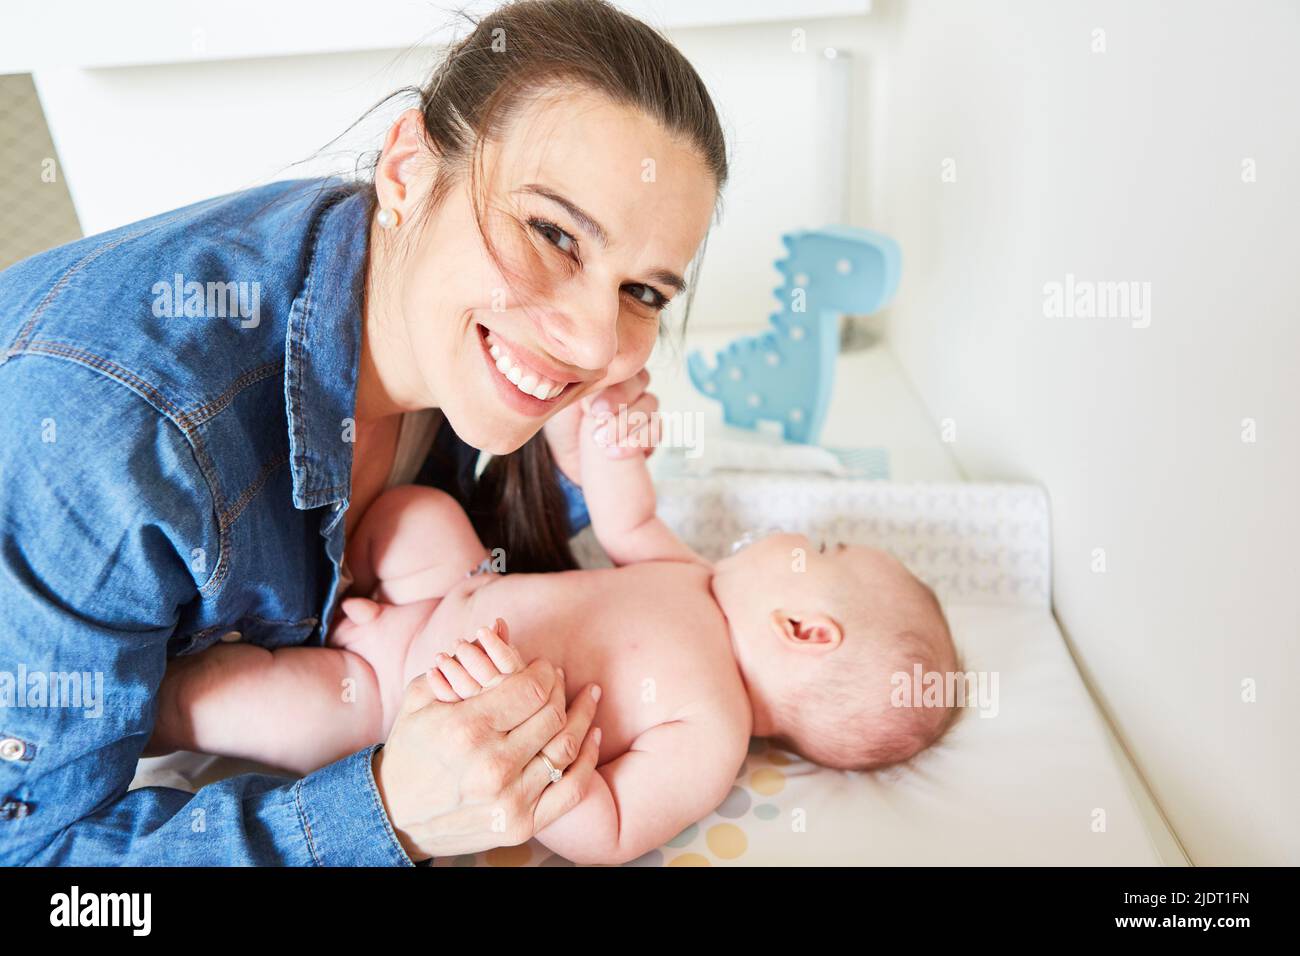 Happy mother lovingly holds her baby by the hands while caring for it on the changing table Stock Photo